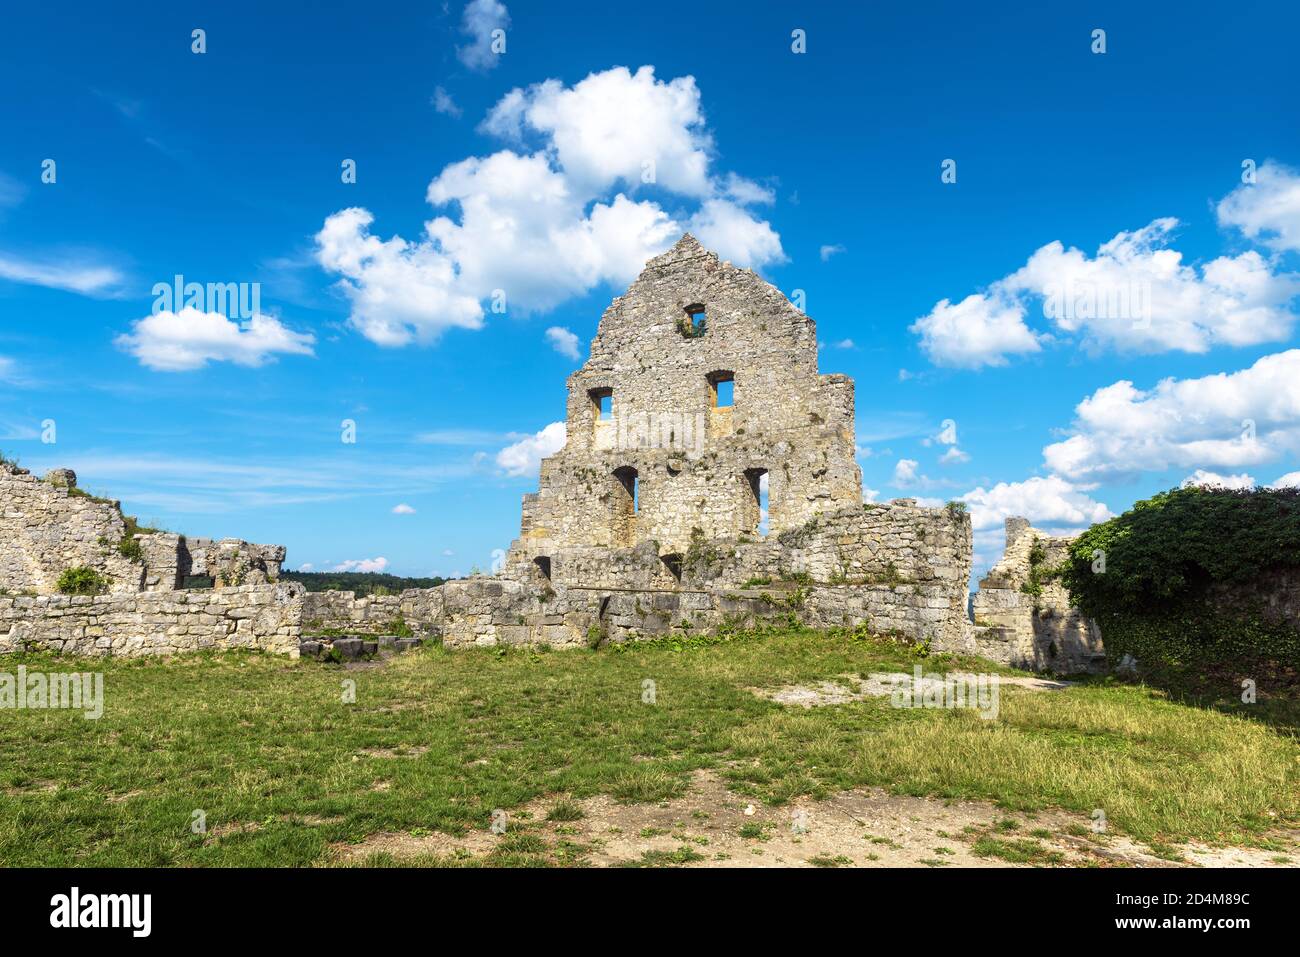 Hohenurach Castle in old town of Bad Urach, Germany. Ruins of this medieval castle is landmark of Baden-Wurttemberg. Landscape with abandoned German c Stock Photo